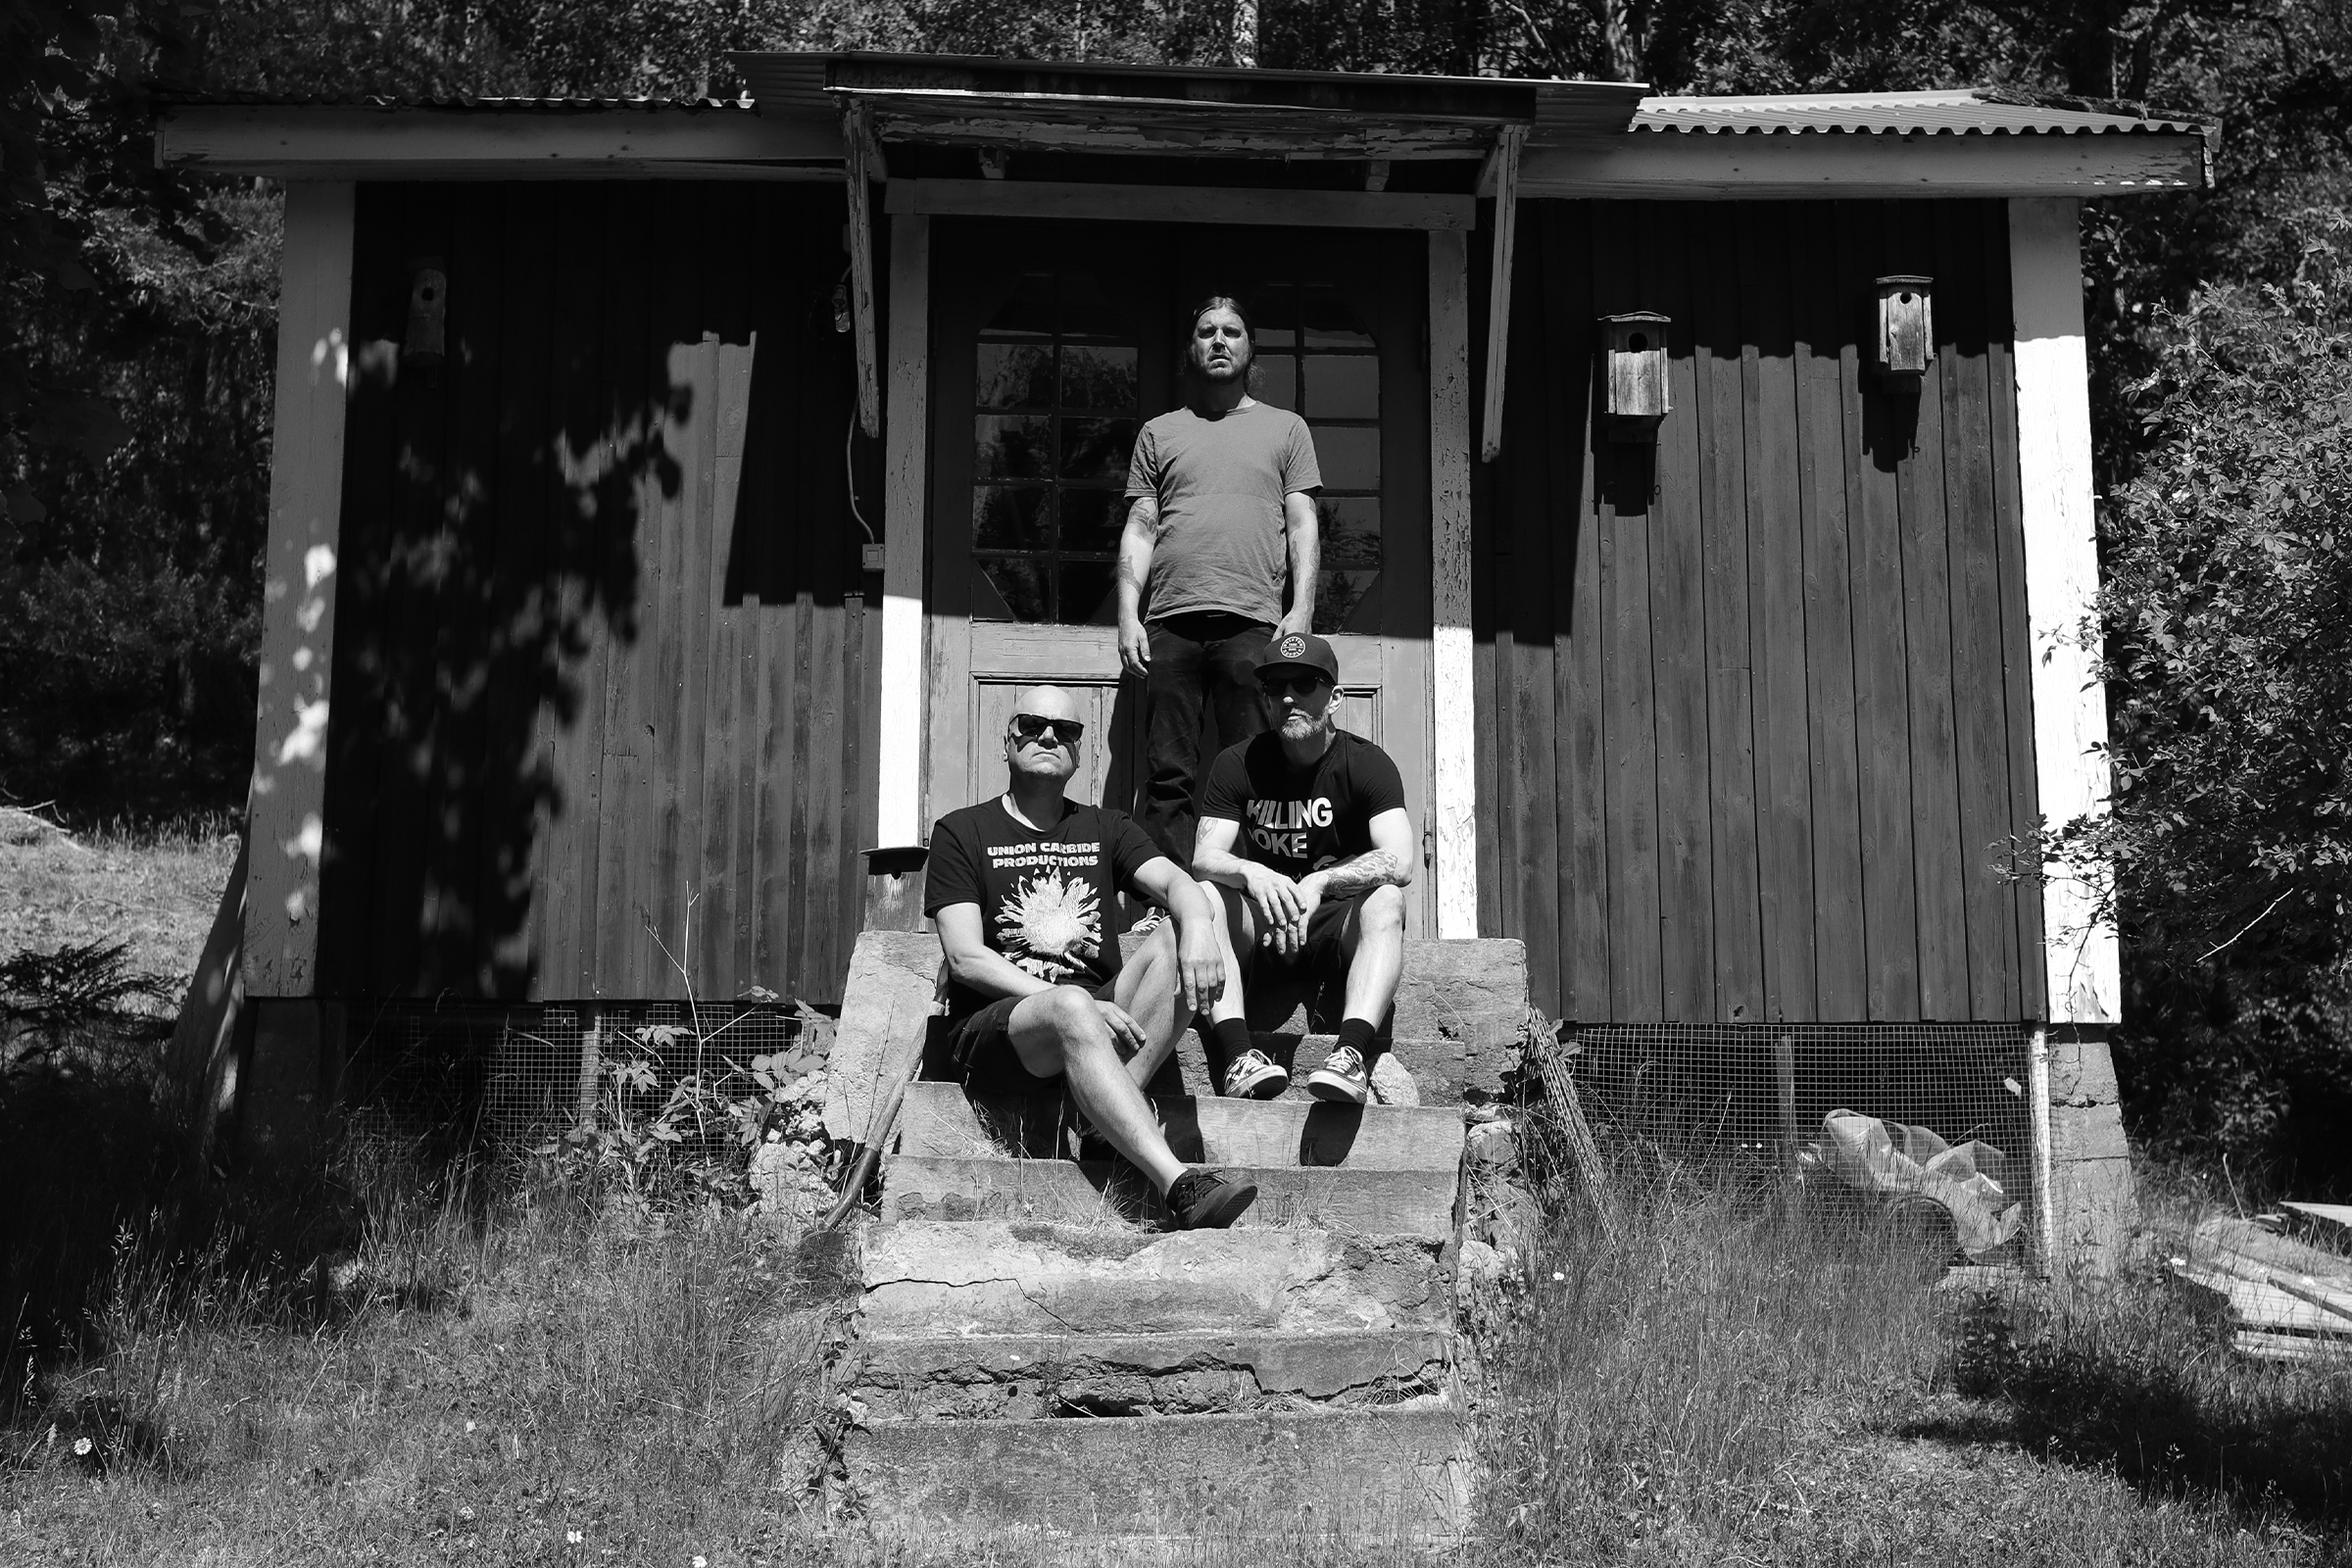 Black and white photo of Haystack outdoors at Studio Underjord: Ulf sitting on steps, Jonas seated higher up, and Patrik standing by the wooden double door, surrounded by nature and traditional Swedish architecture, photographed by Joona Hassinen.